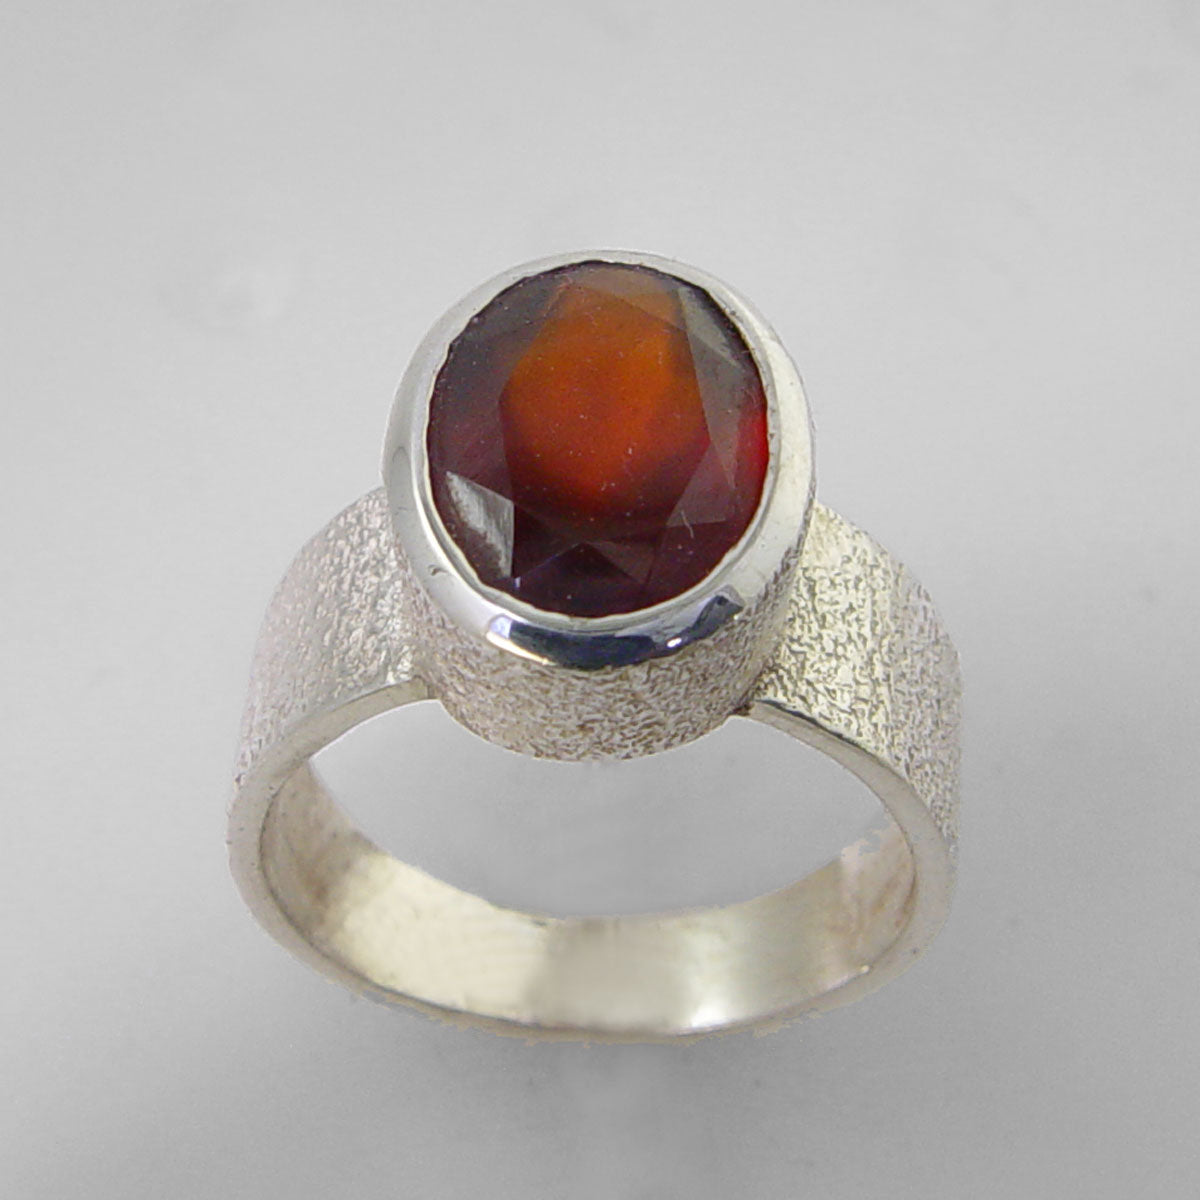 Cinnamon Hessonite Garnet 6.3 ct Faceted Oval Sterling Silver Ring, Size 8